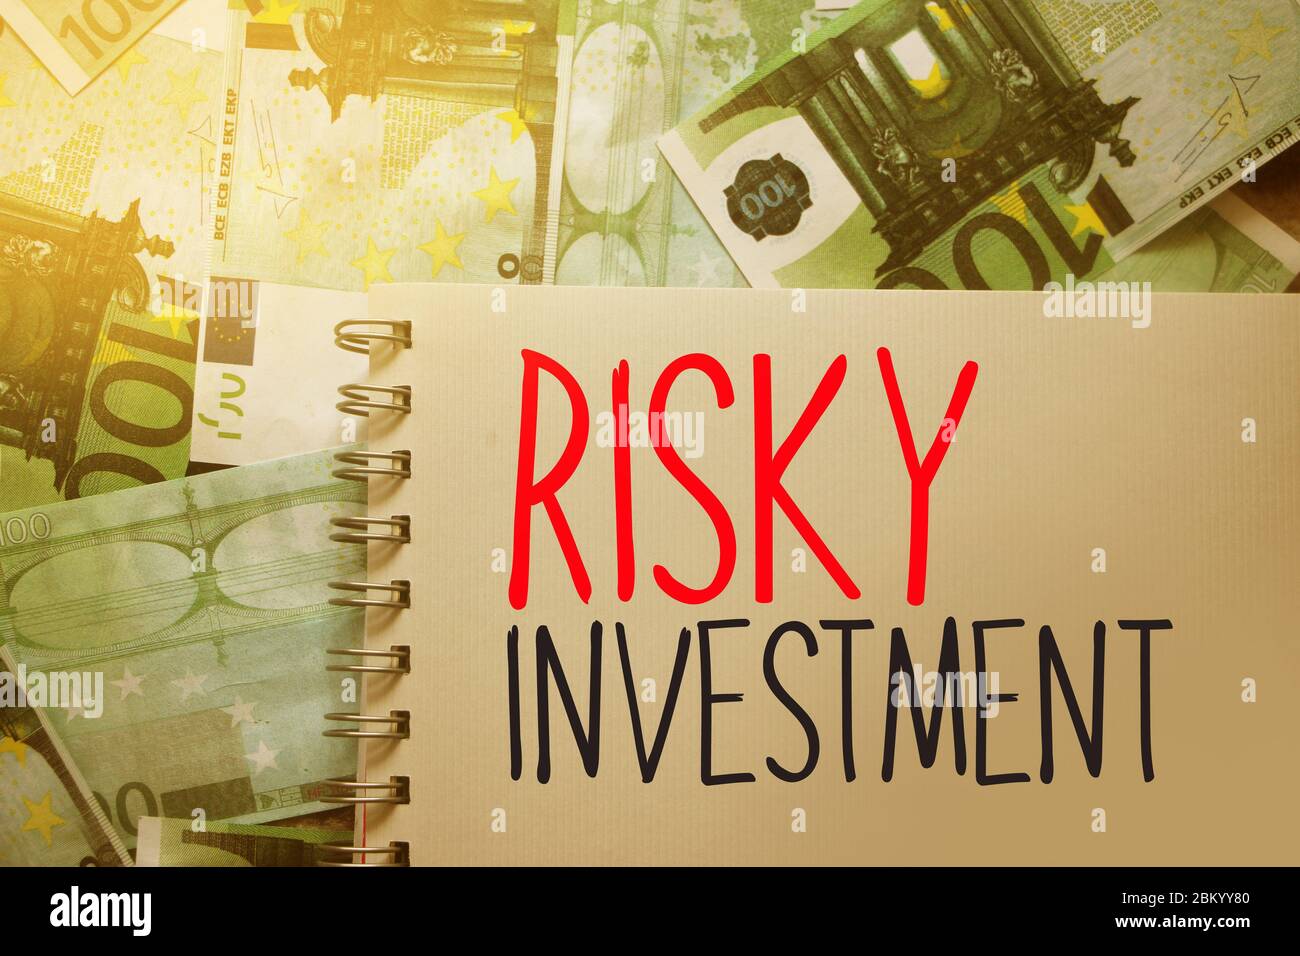 Risky investment words written on copybook page. Saving and invest financila business concept Stock Photo